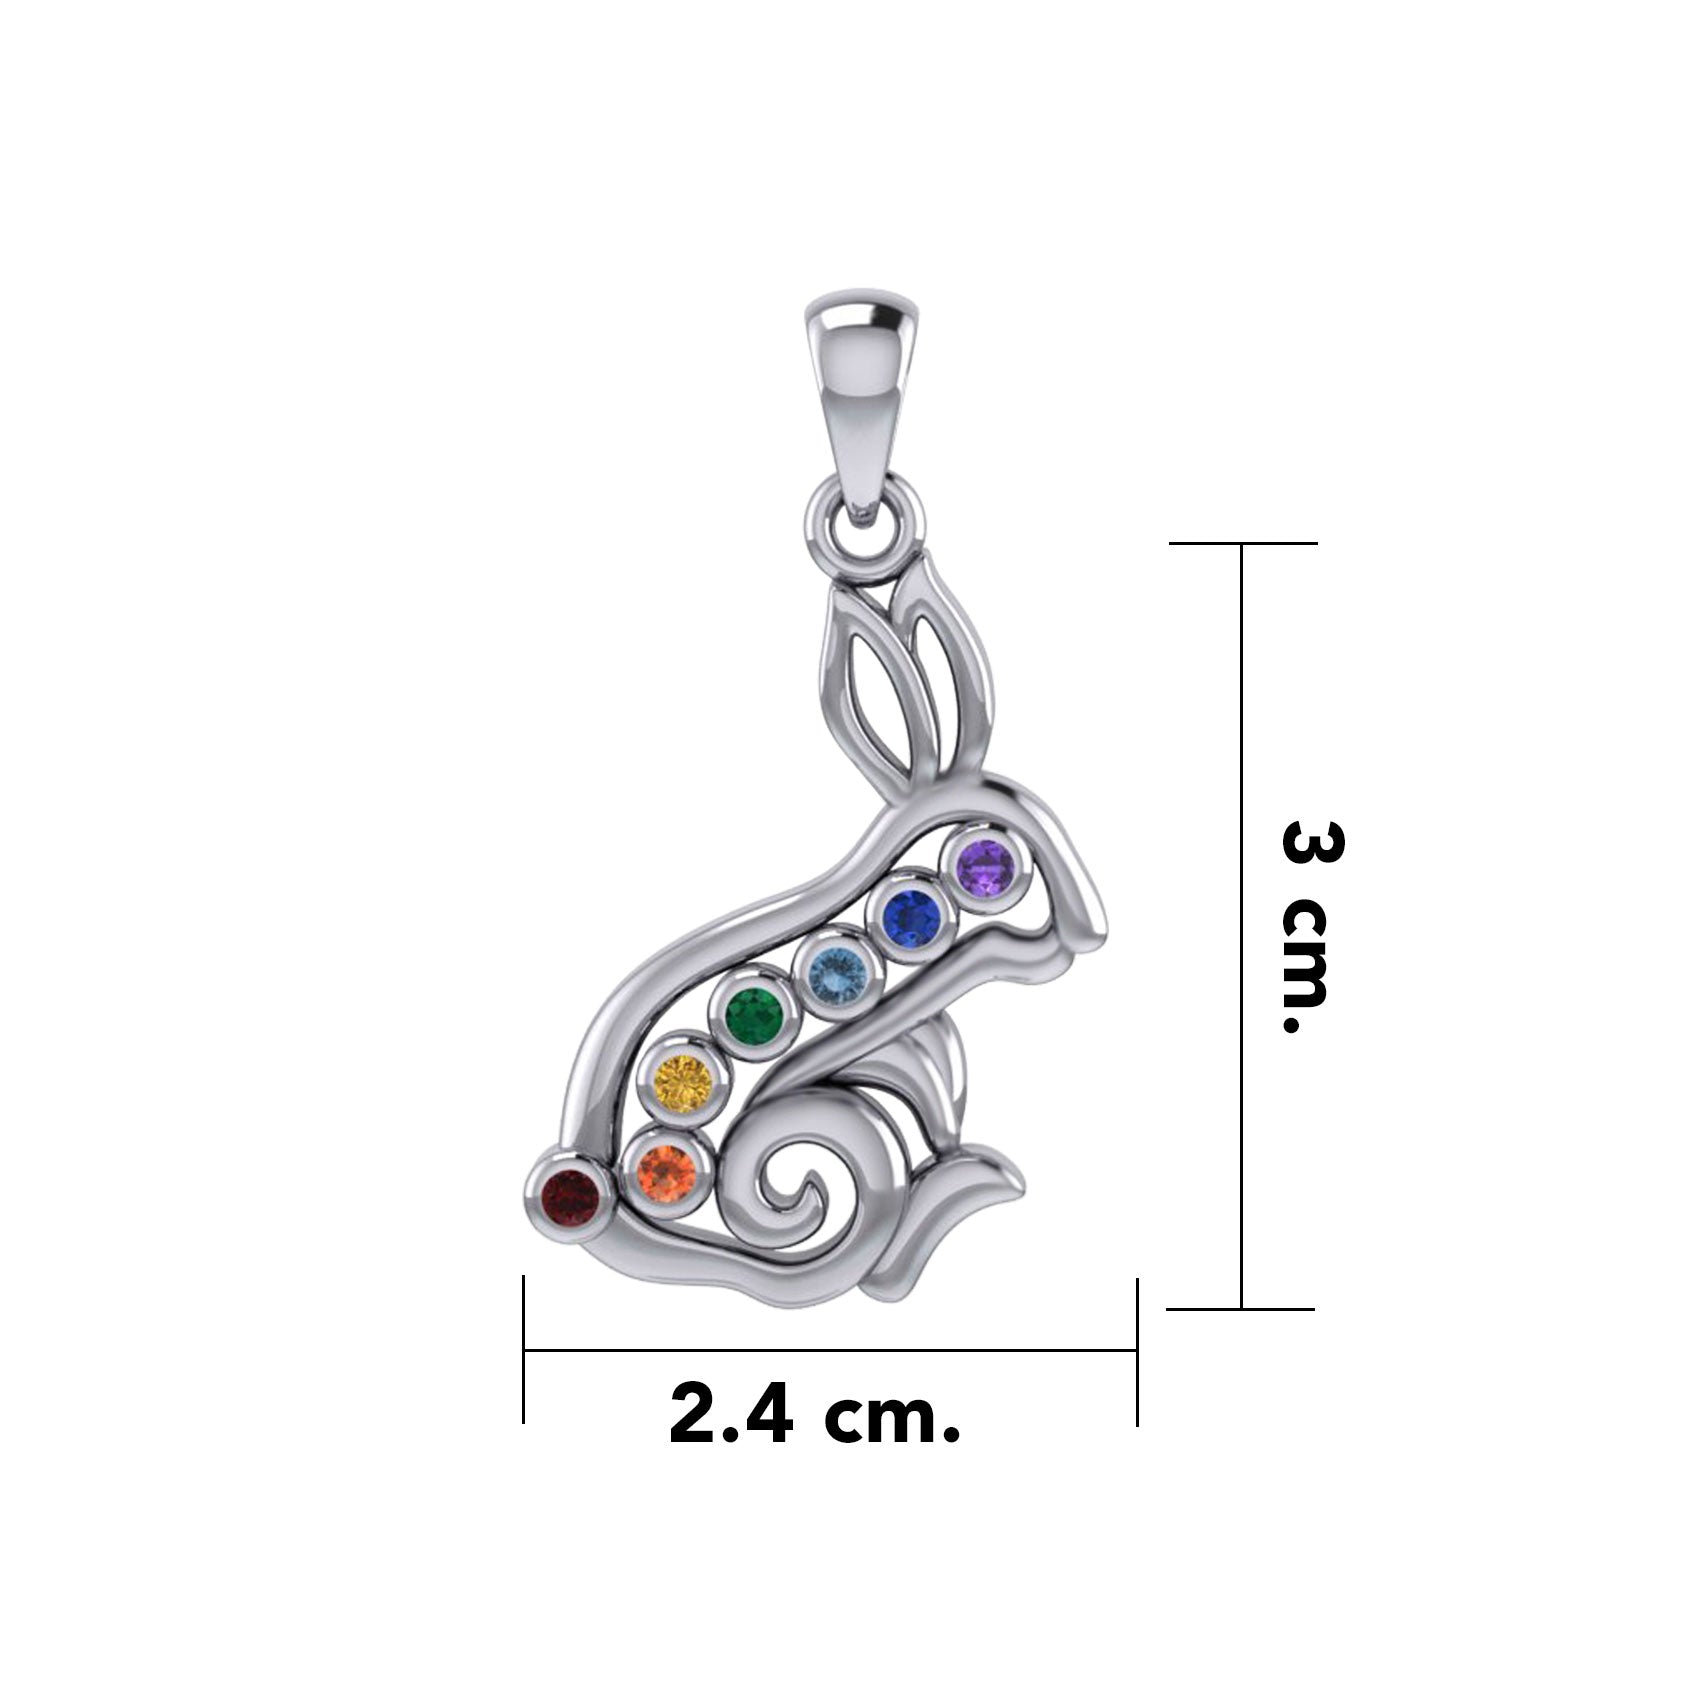 Rabbit or Hare Silver Pendant with Chakra Gemstone TPD6039